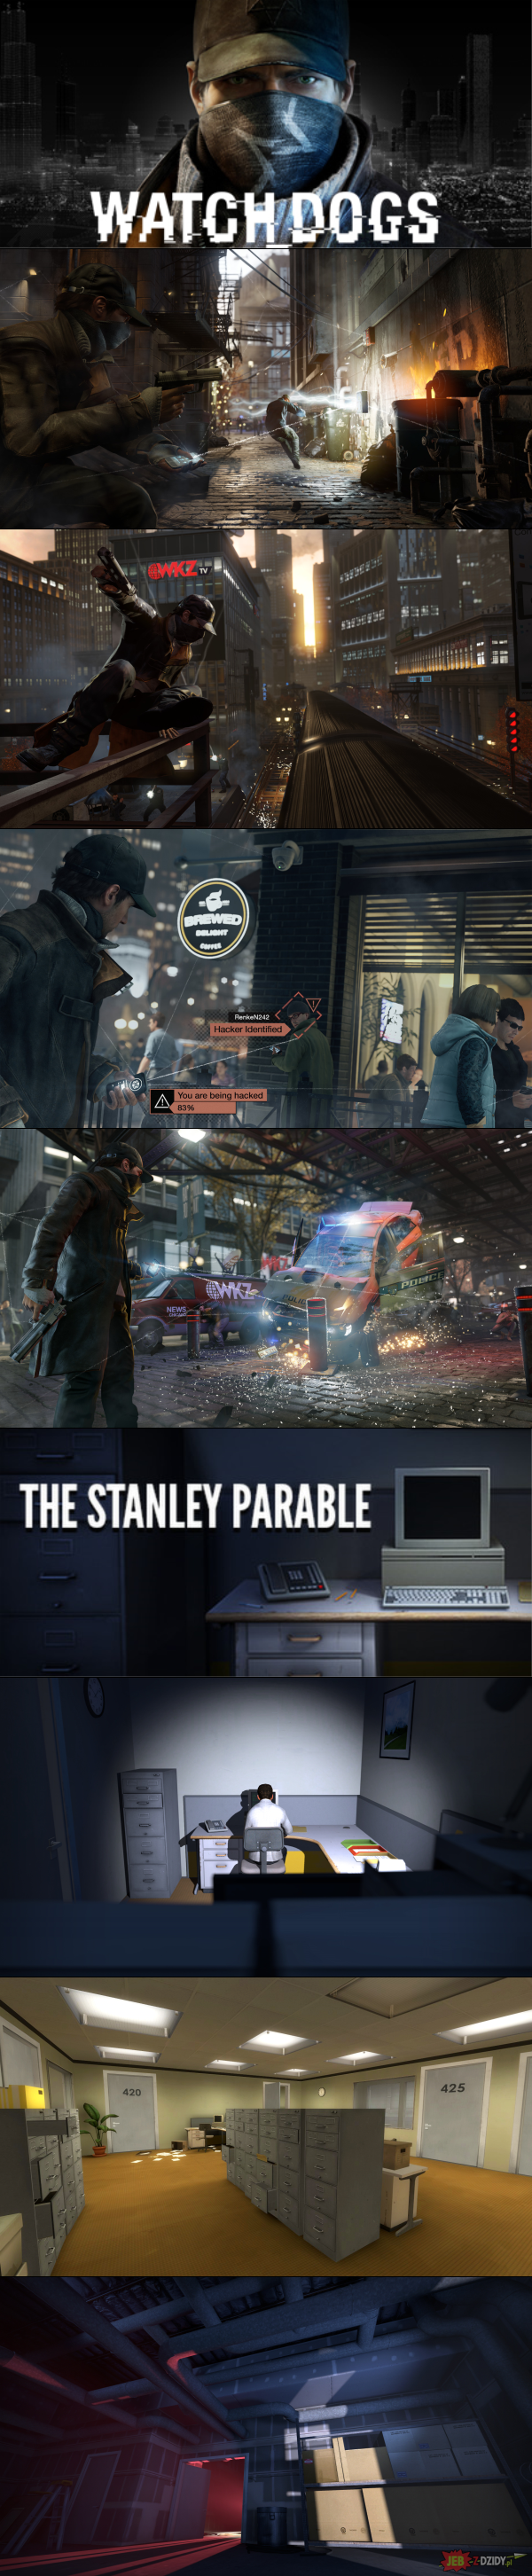 Watch Dogs i The Stanley Parable za darmo w epic games store